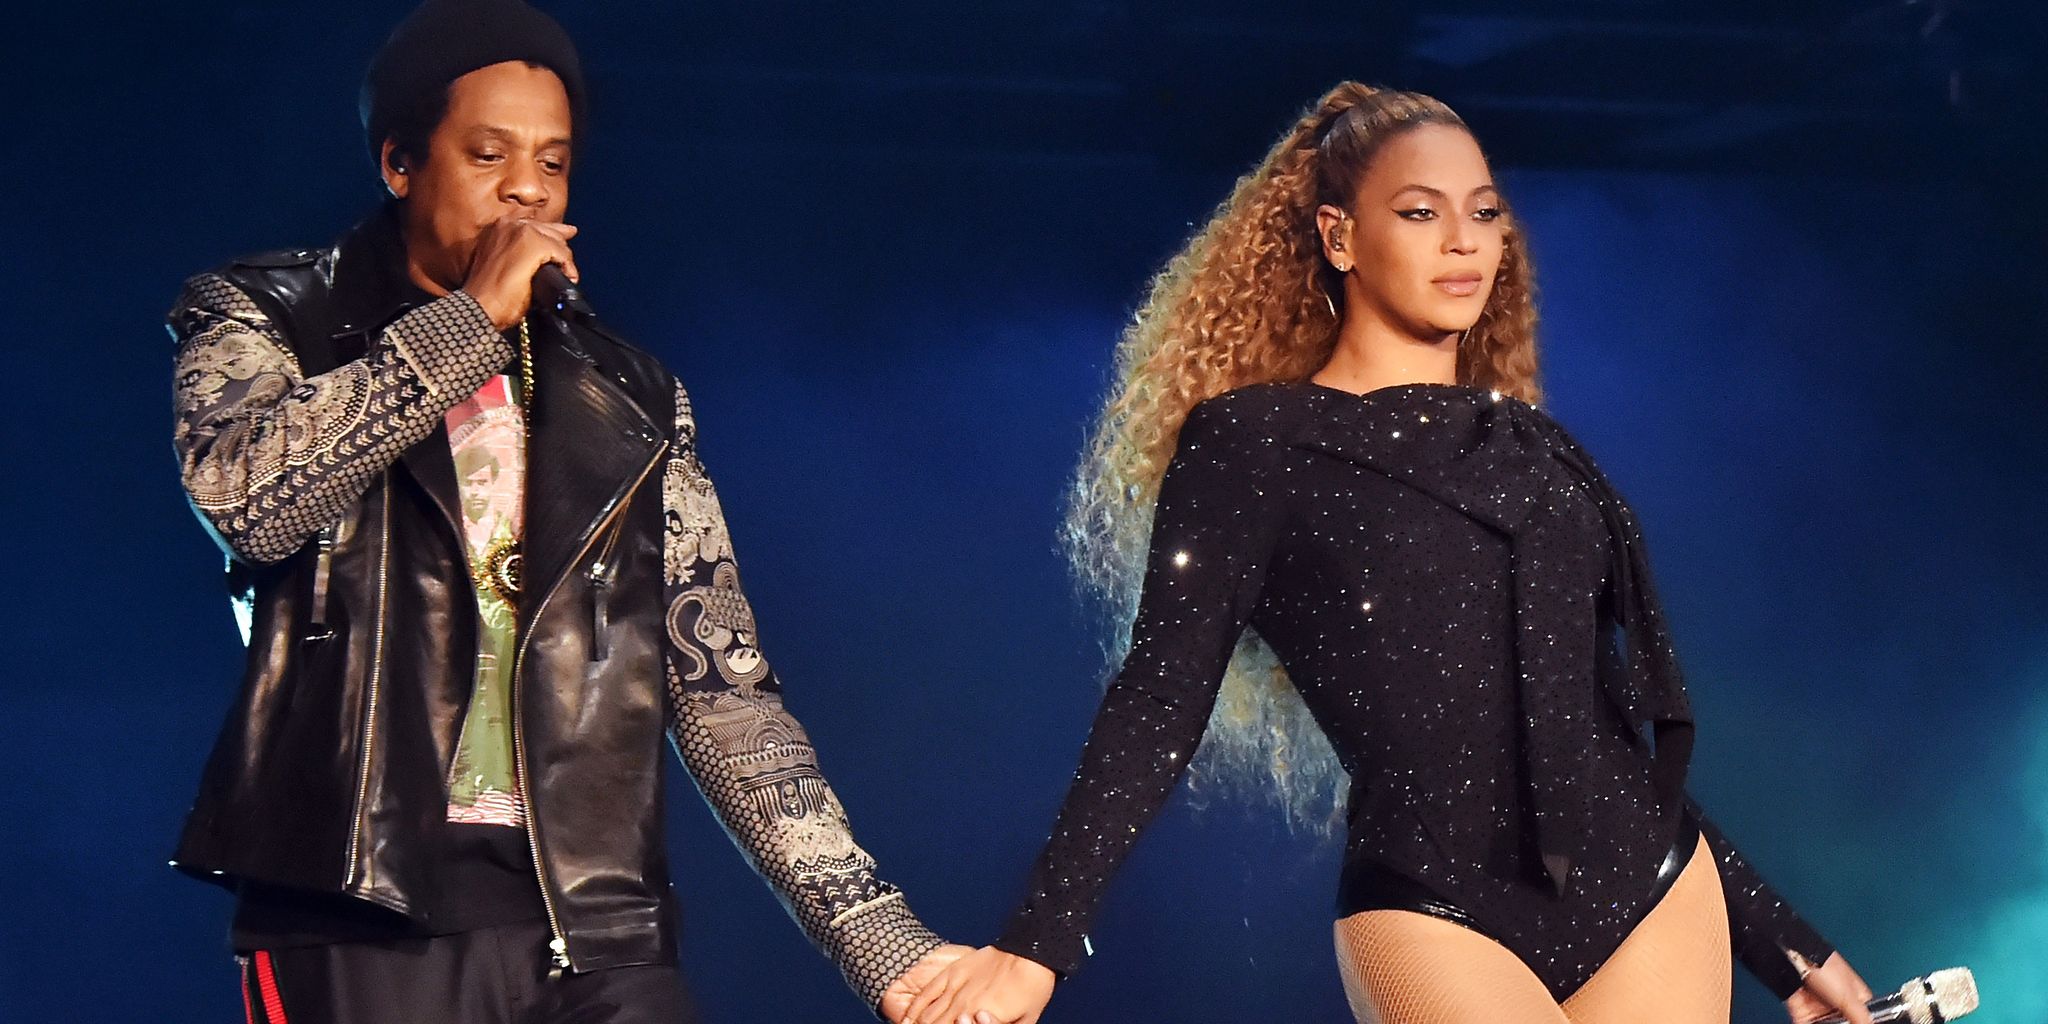 beyonce-jay-z-nuovo-album-everything-is-love